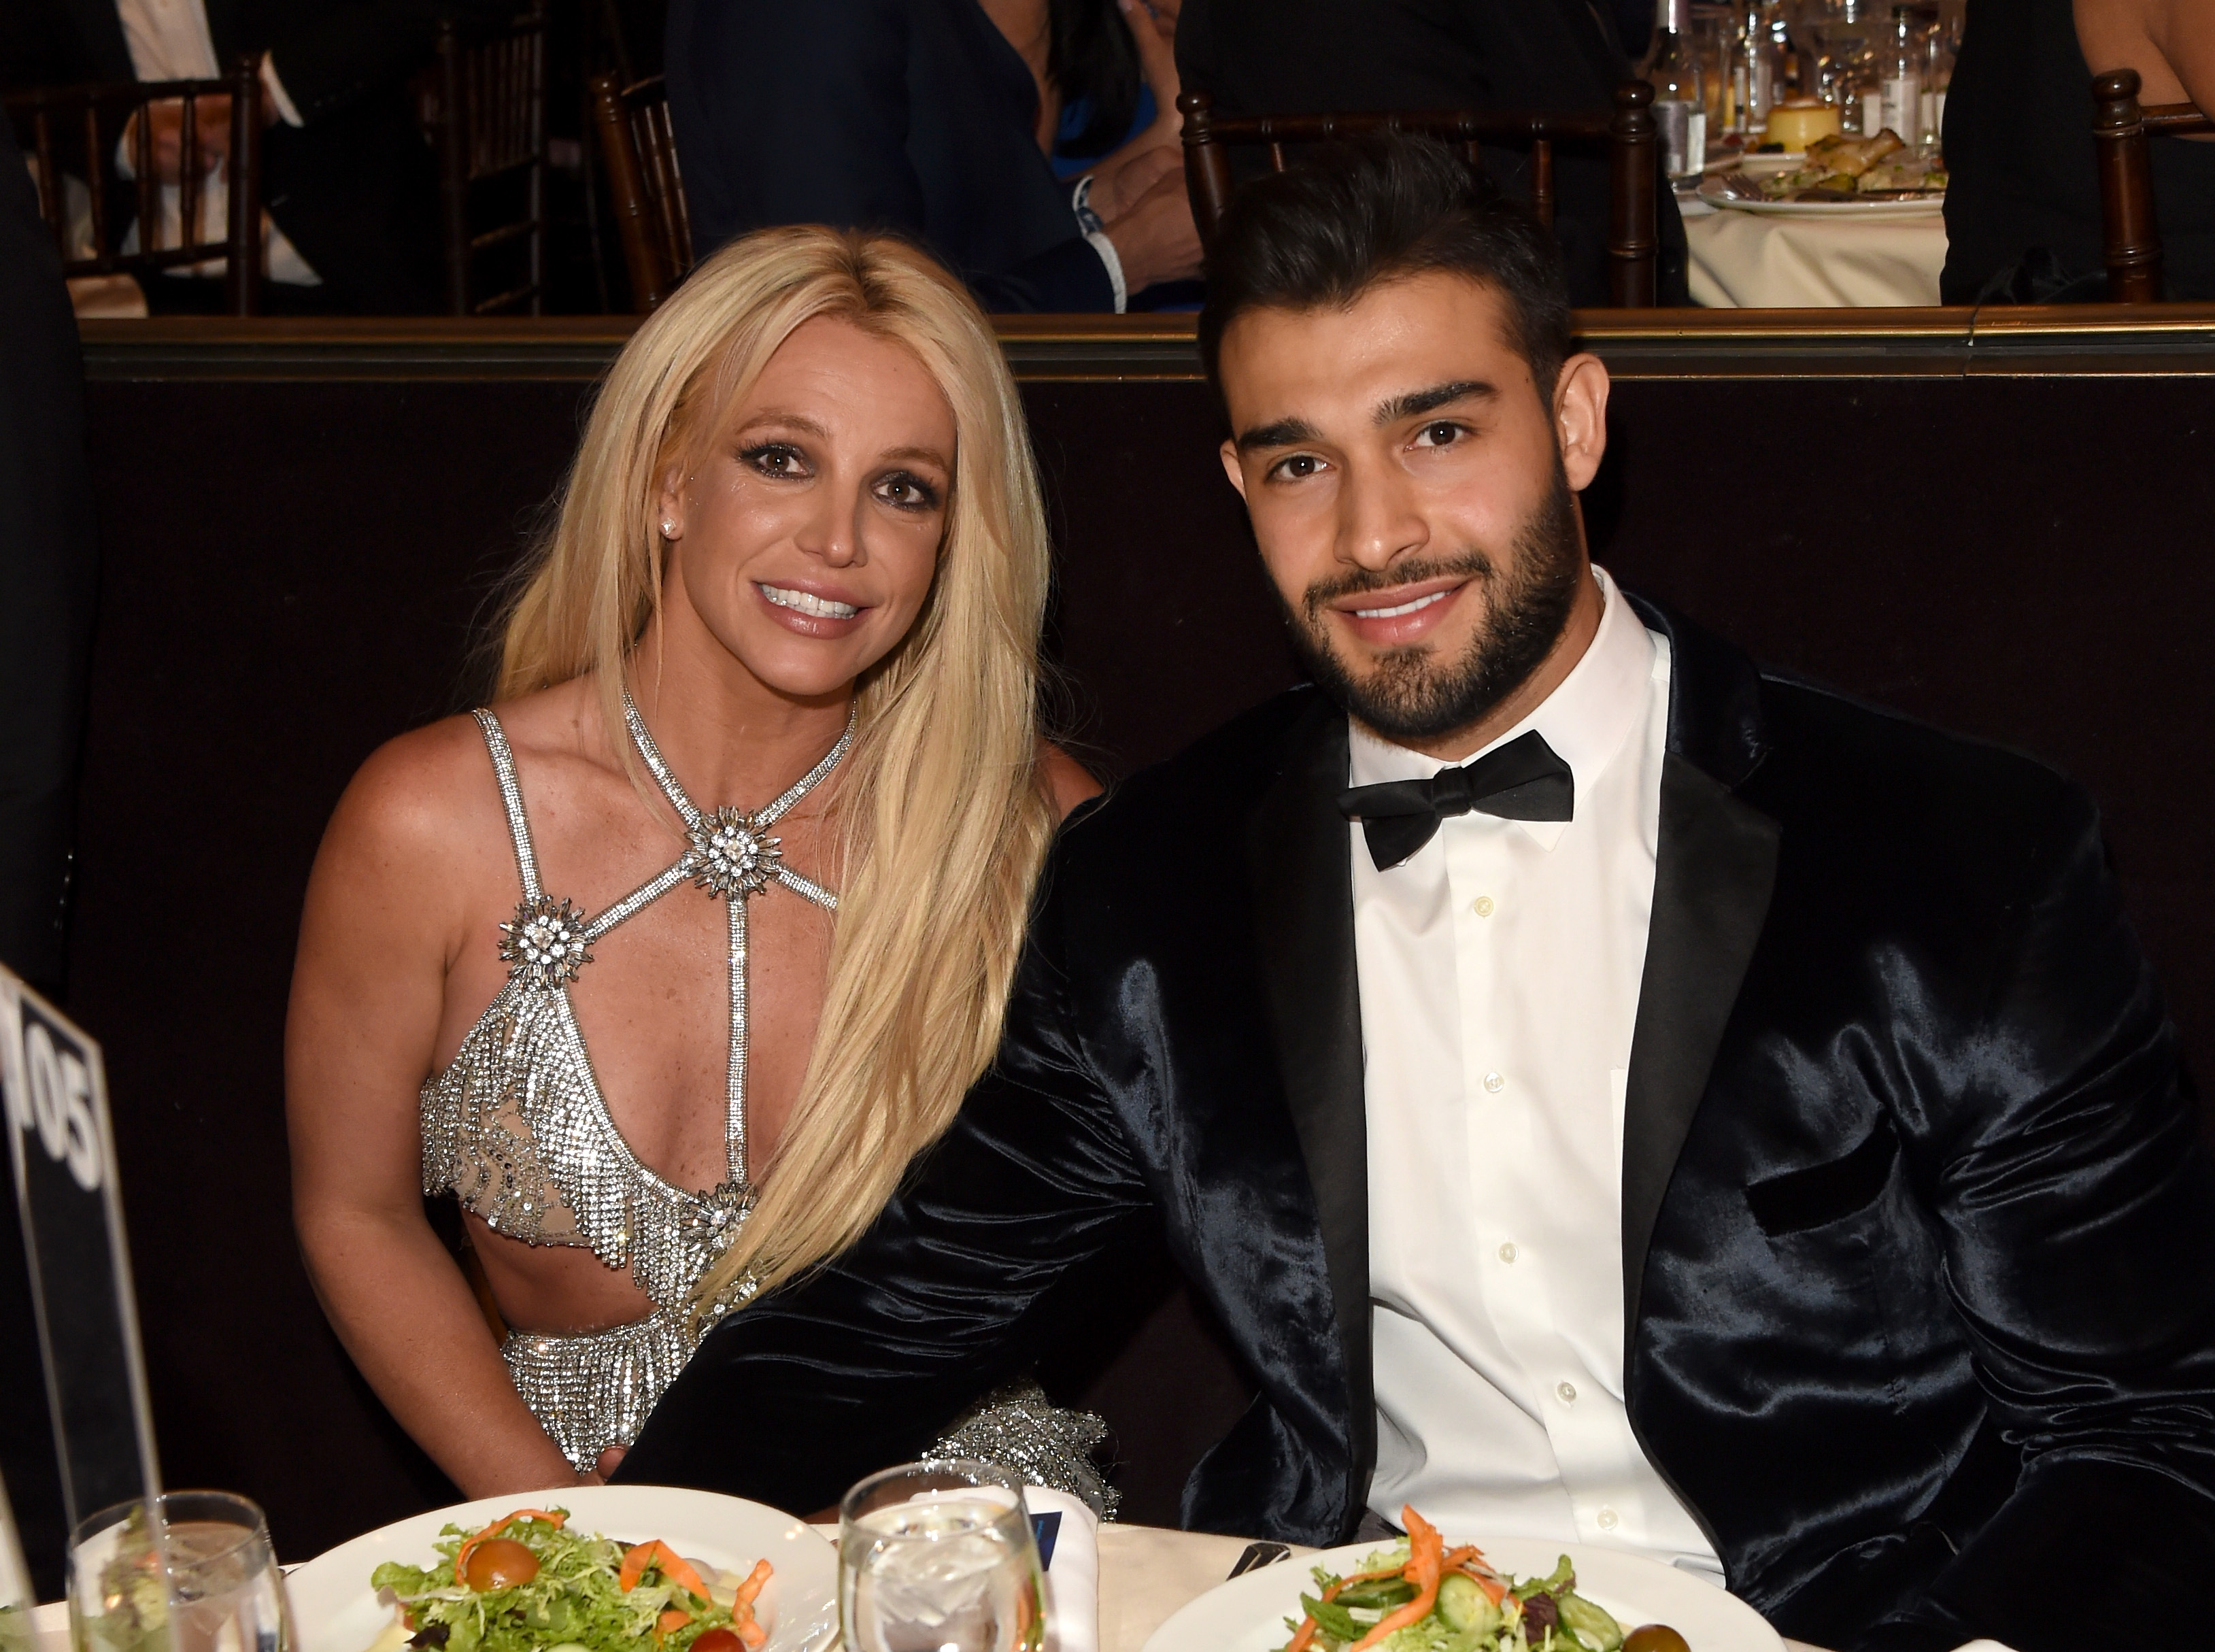  Britney Spears and Sam Asghari pose at the 29th Annual GLAAD Media Awards at The Beverly Hilton Hotel on April 12, 2018, in Beverly Hills, California | Source: Getty Images